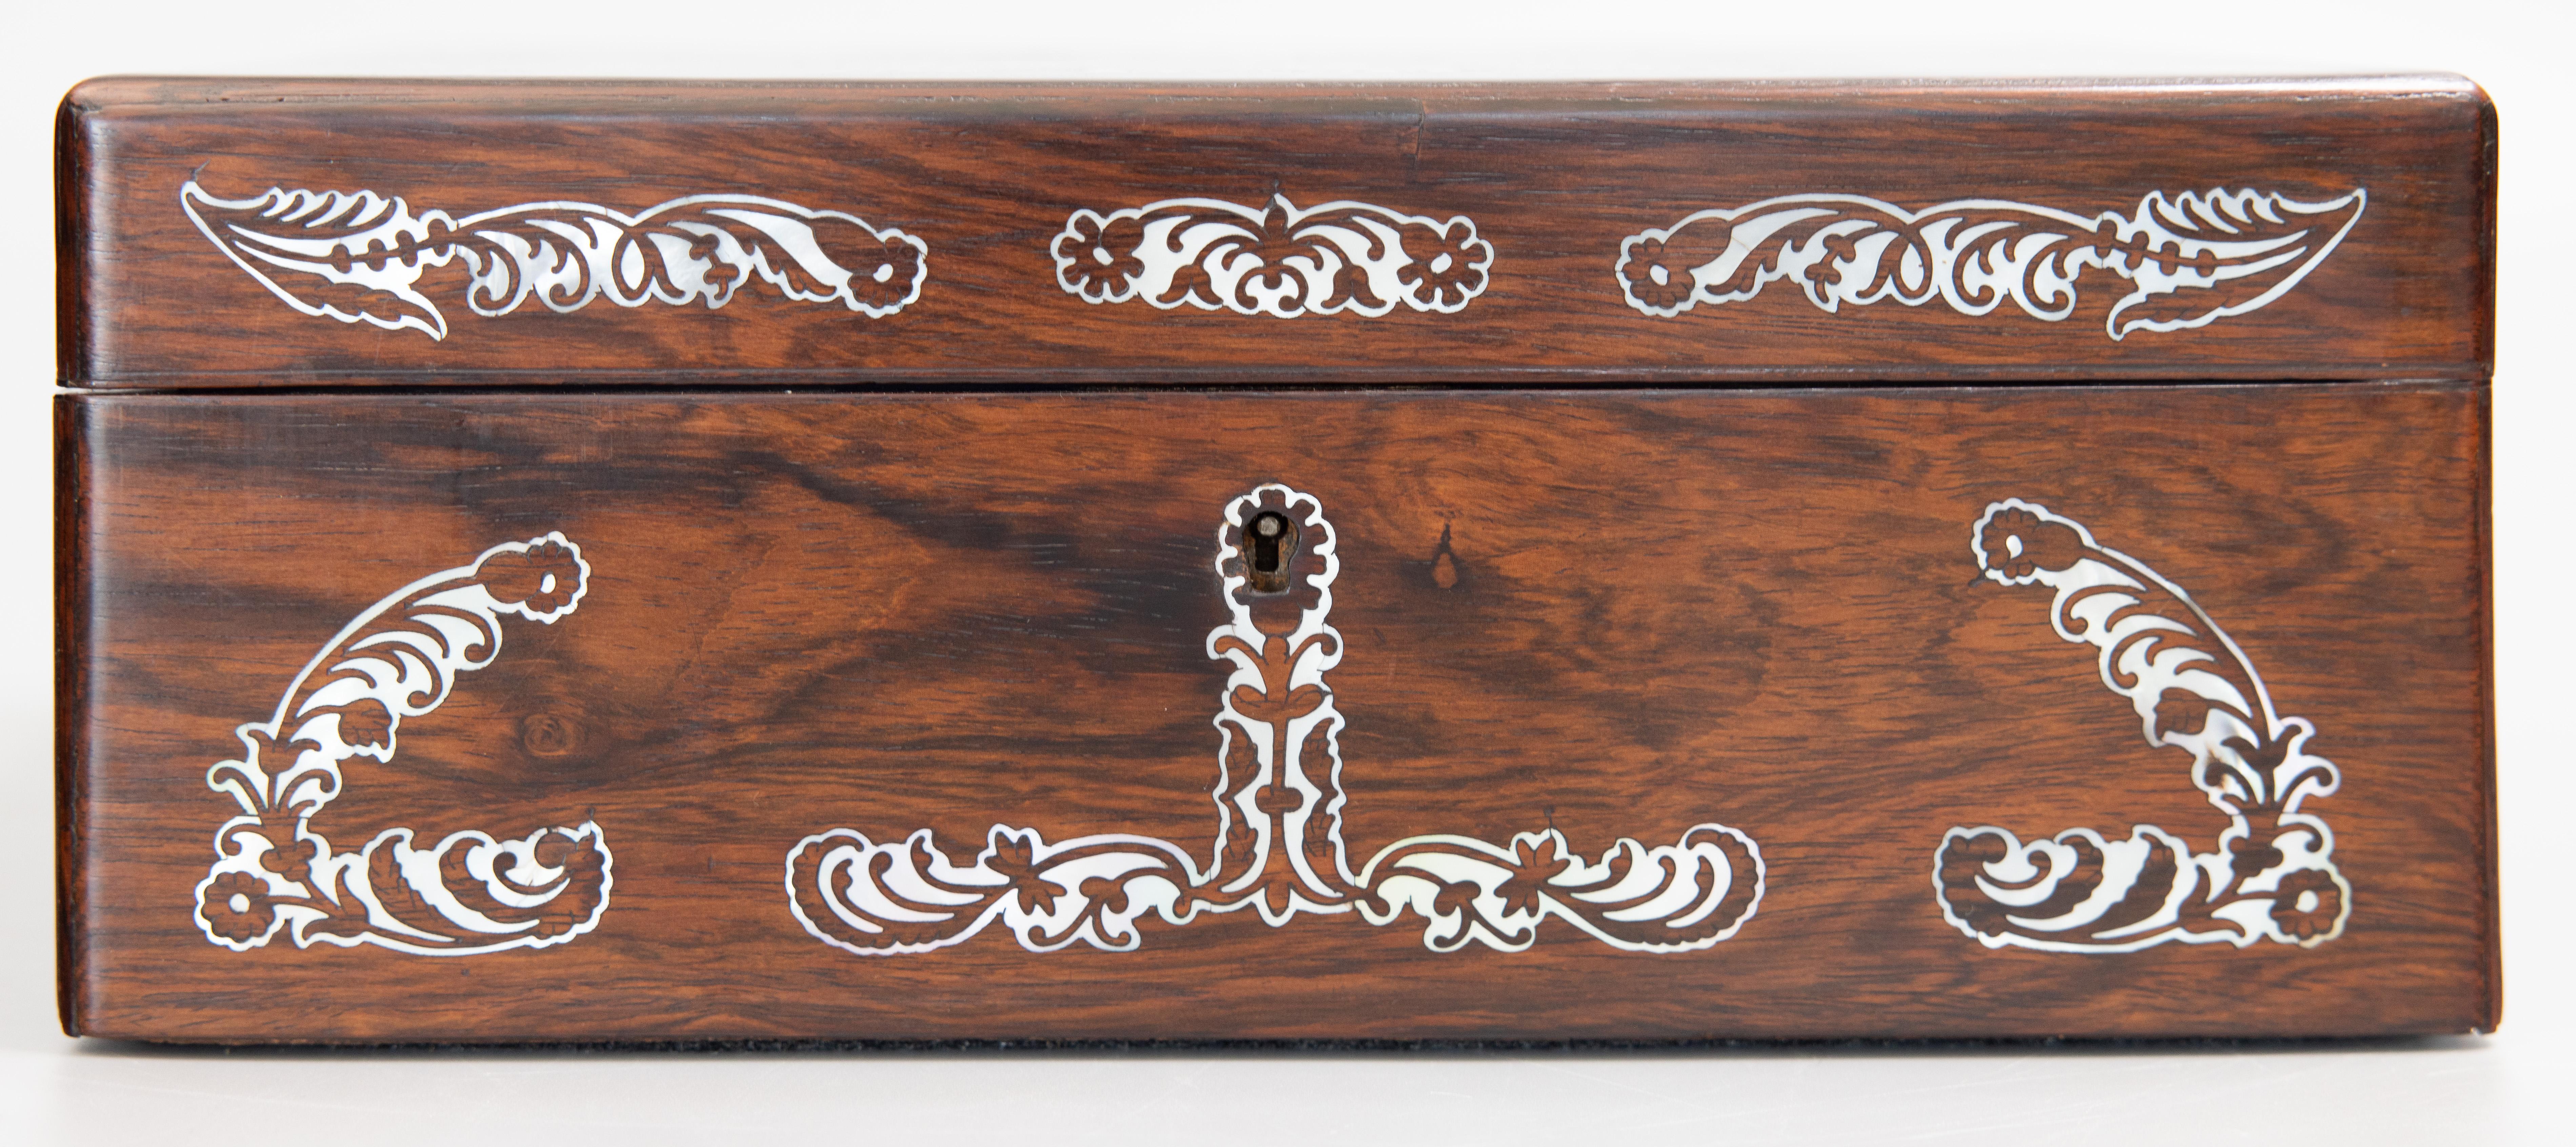 19th Century English Rosewood & Mother of Pearl Jewelry Box For Sale 3